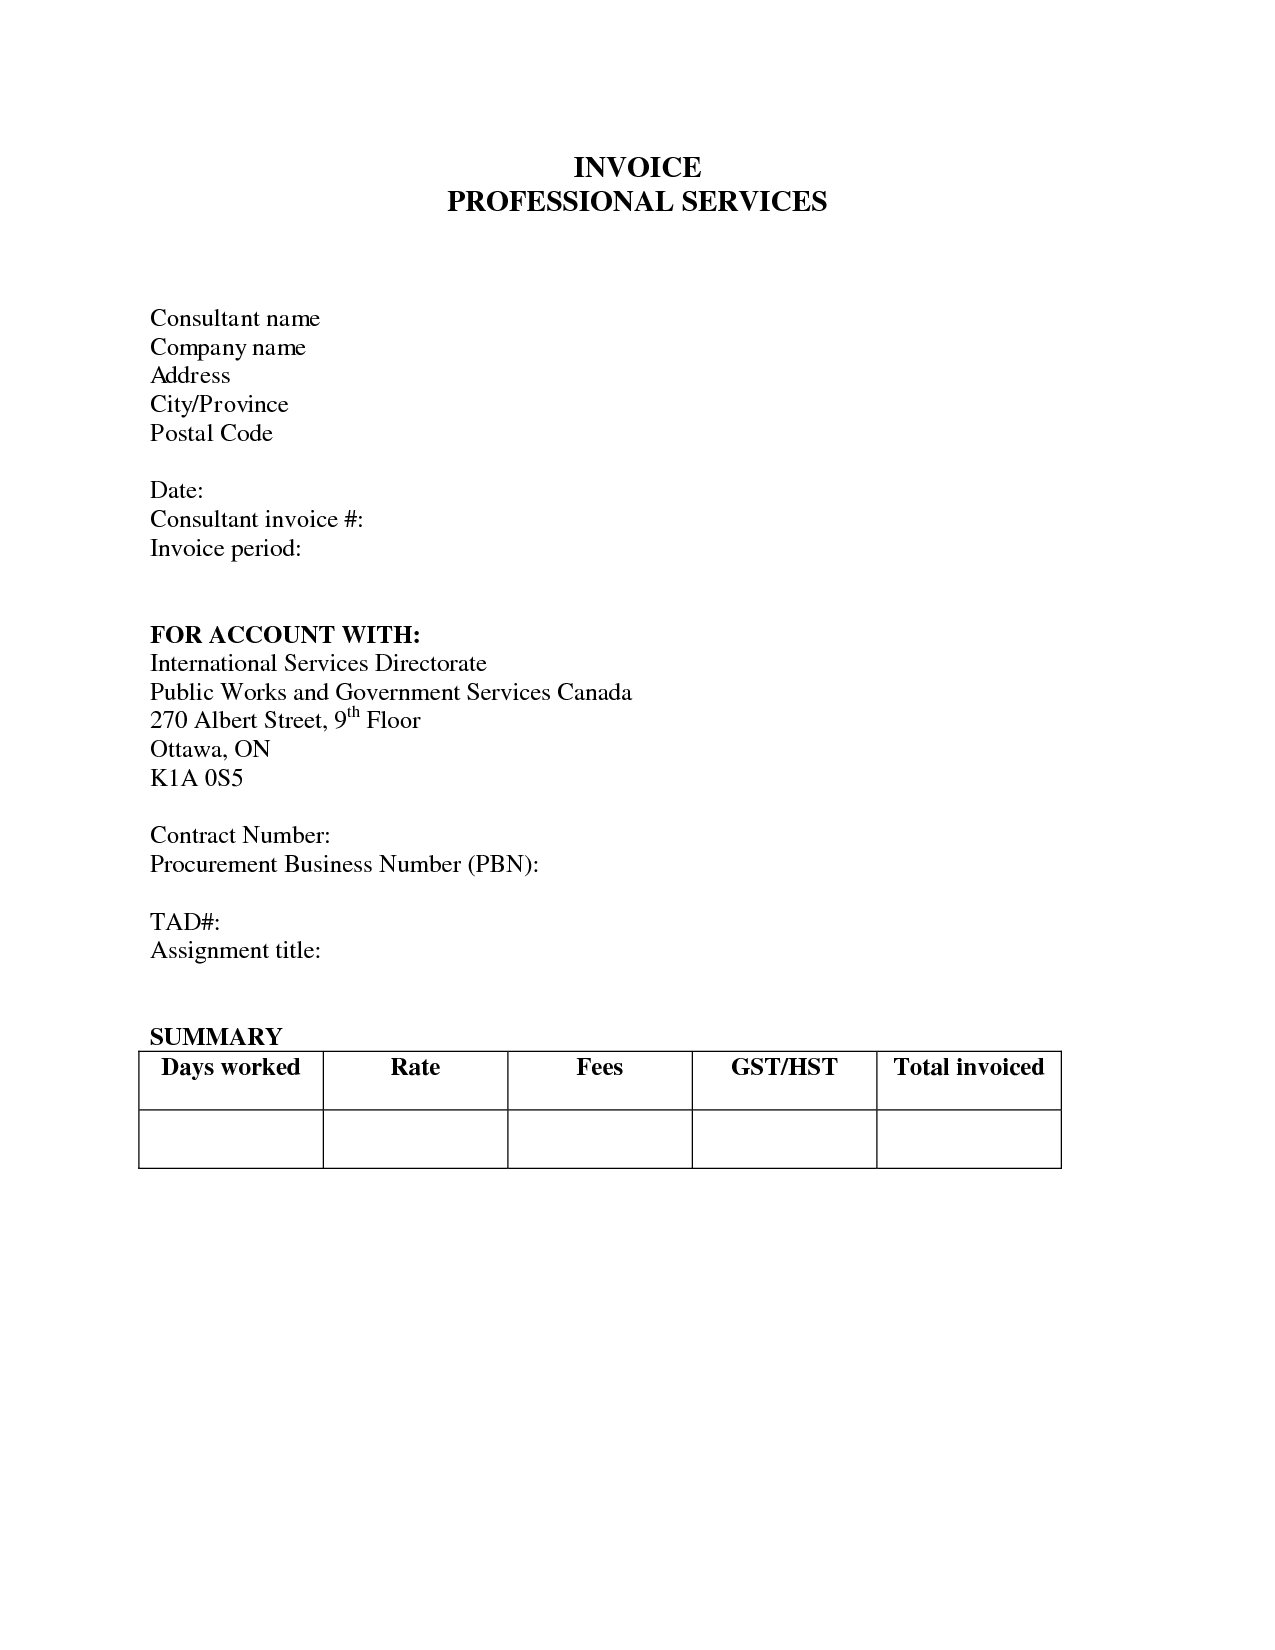 professional services invoice template india